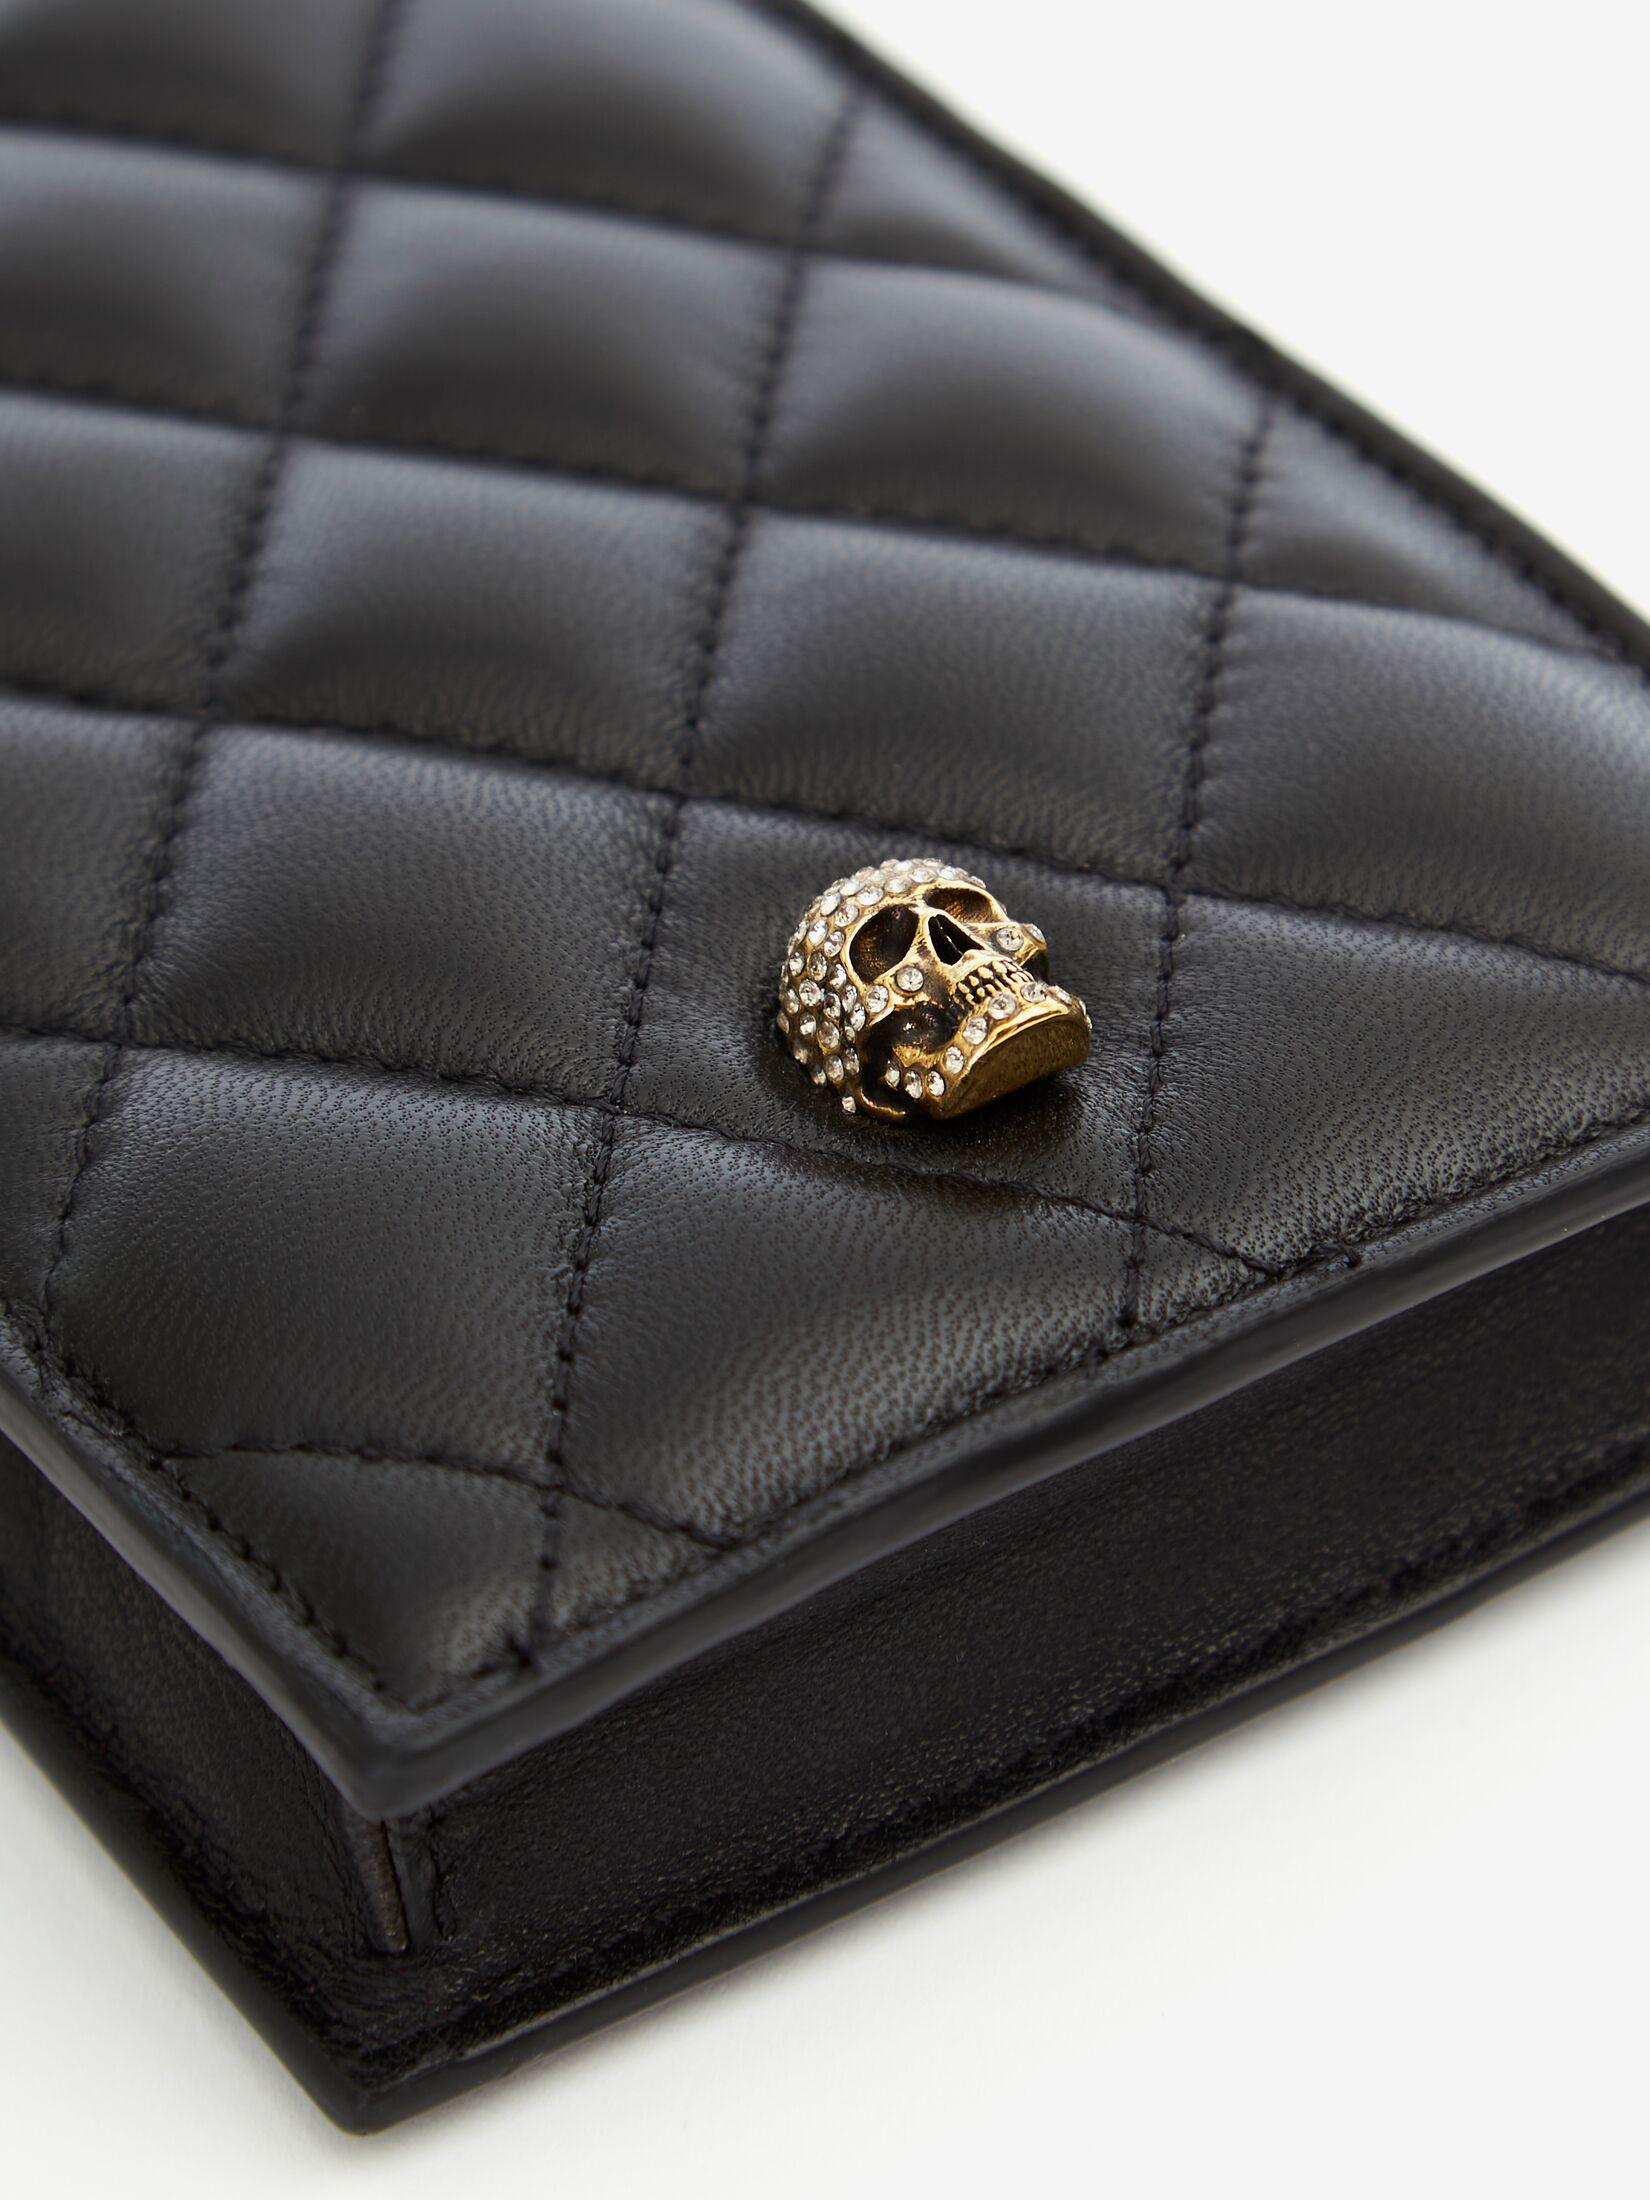 Alexander McQueen Leather Skull Phone Case With Chain in Black - Lyst